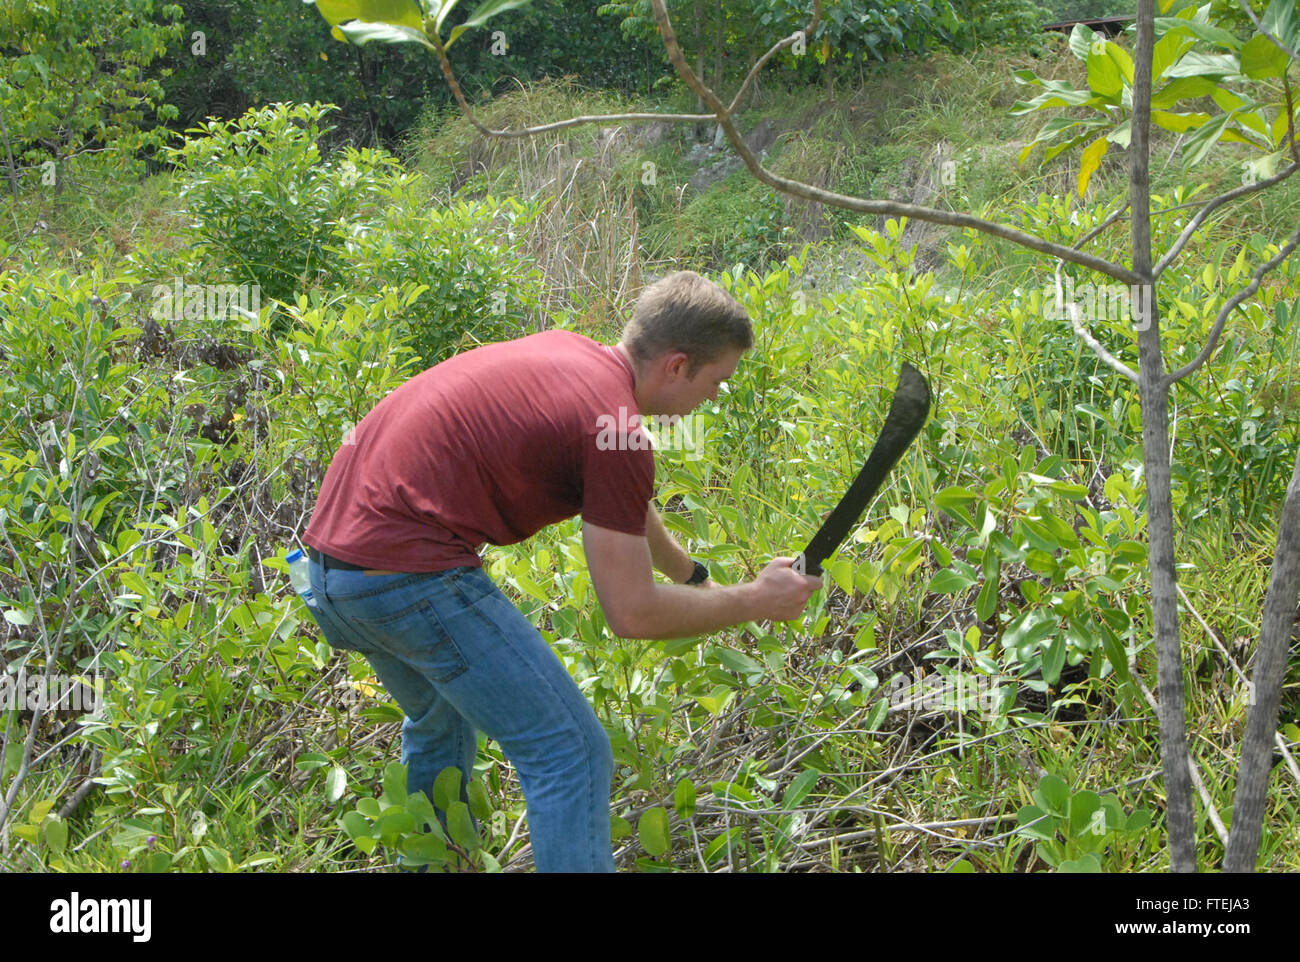 PORT VICTORIA, Seychelles (Nov. 14, 2014) – Fire Controlman 3rd Class Matthew Elliot, assigned to USS James E. Williams (DDG 95), cuts down invasive plants during a community relations event here, Nov. 14, 2014. James E. Williams, an Arleigh Burke-class guided-missile destroyer homeported in Norfolk, is conducting naval operations in the U.S. 6th Fleet area of operations in support of U.S. national security interests in Europe Stock Photo